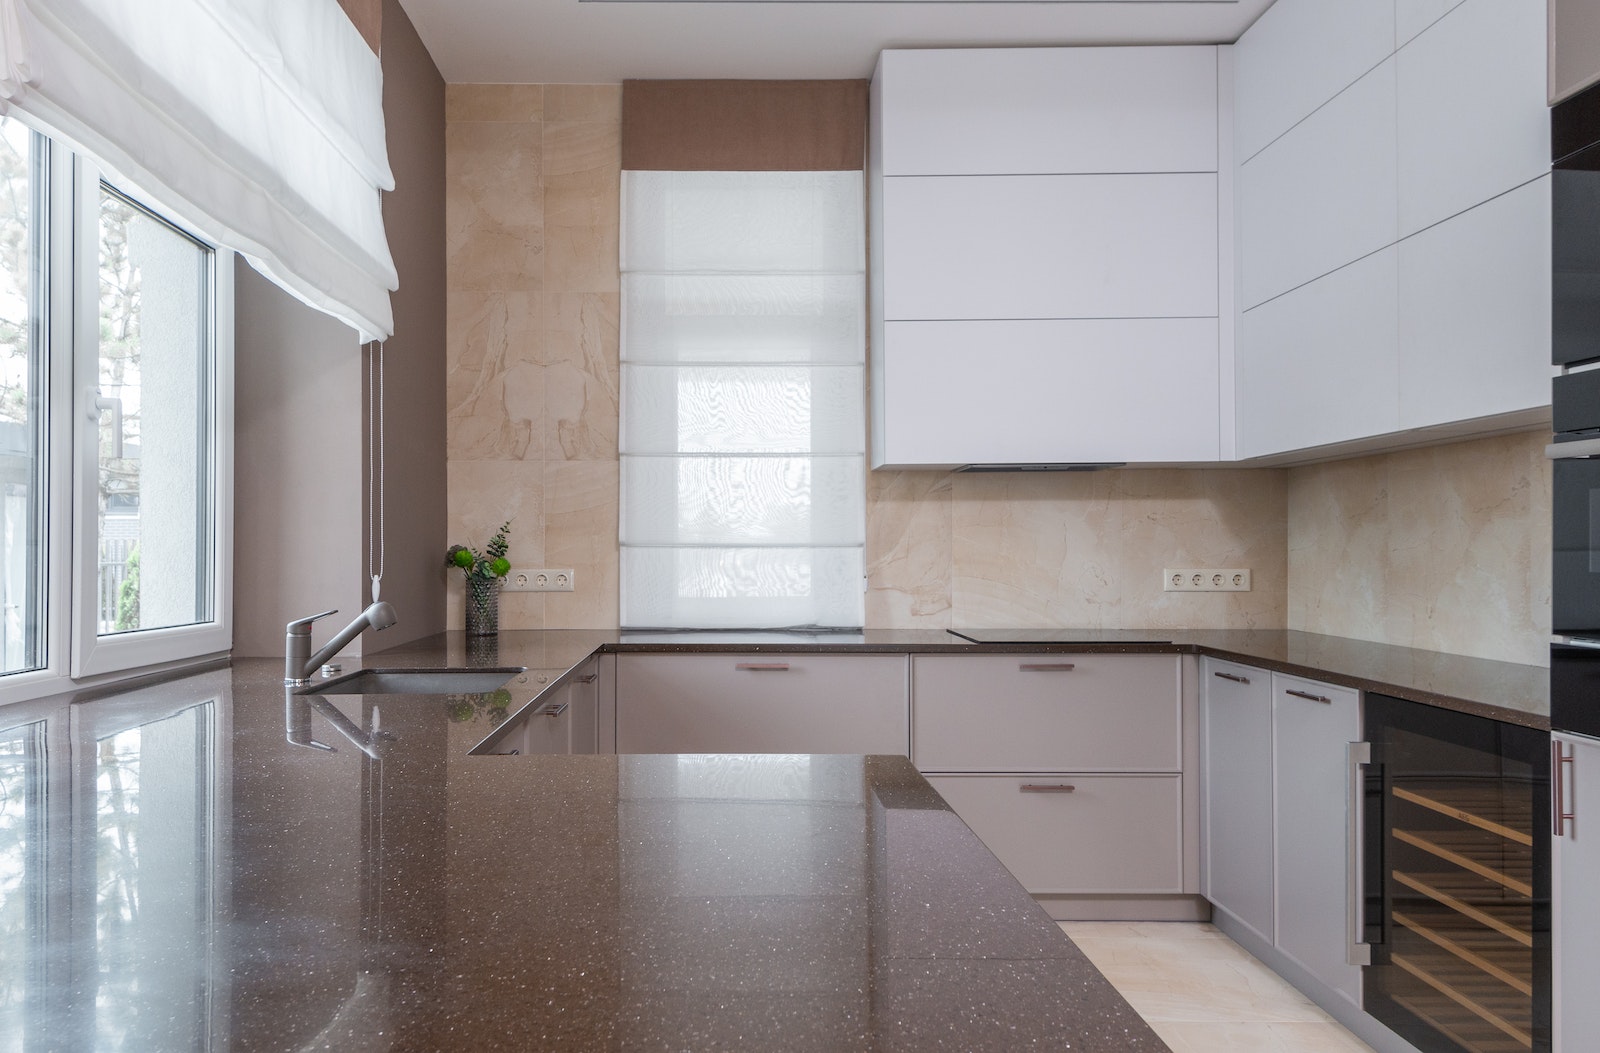 Cleaning Kitchen Countertops: Materials and Methods